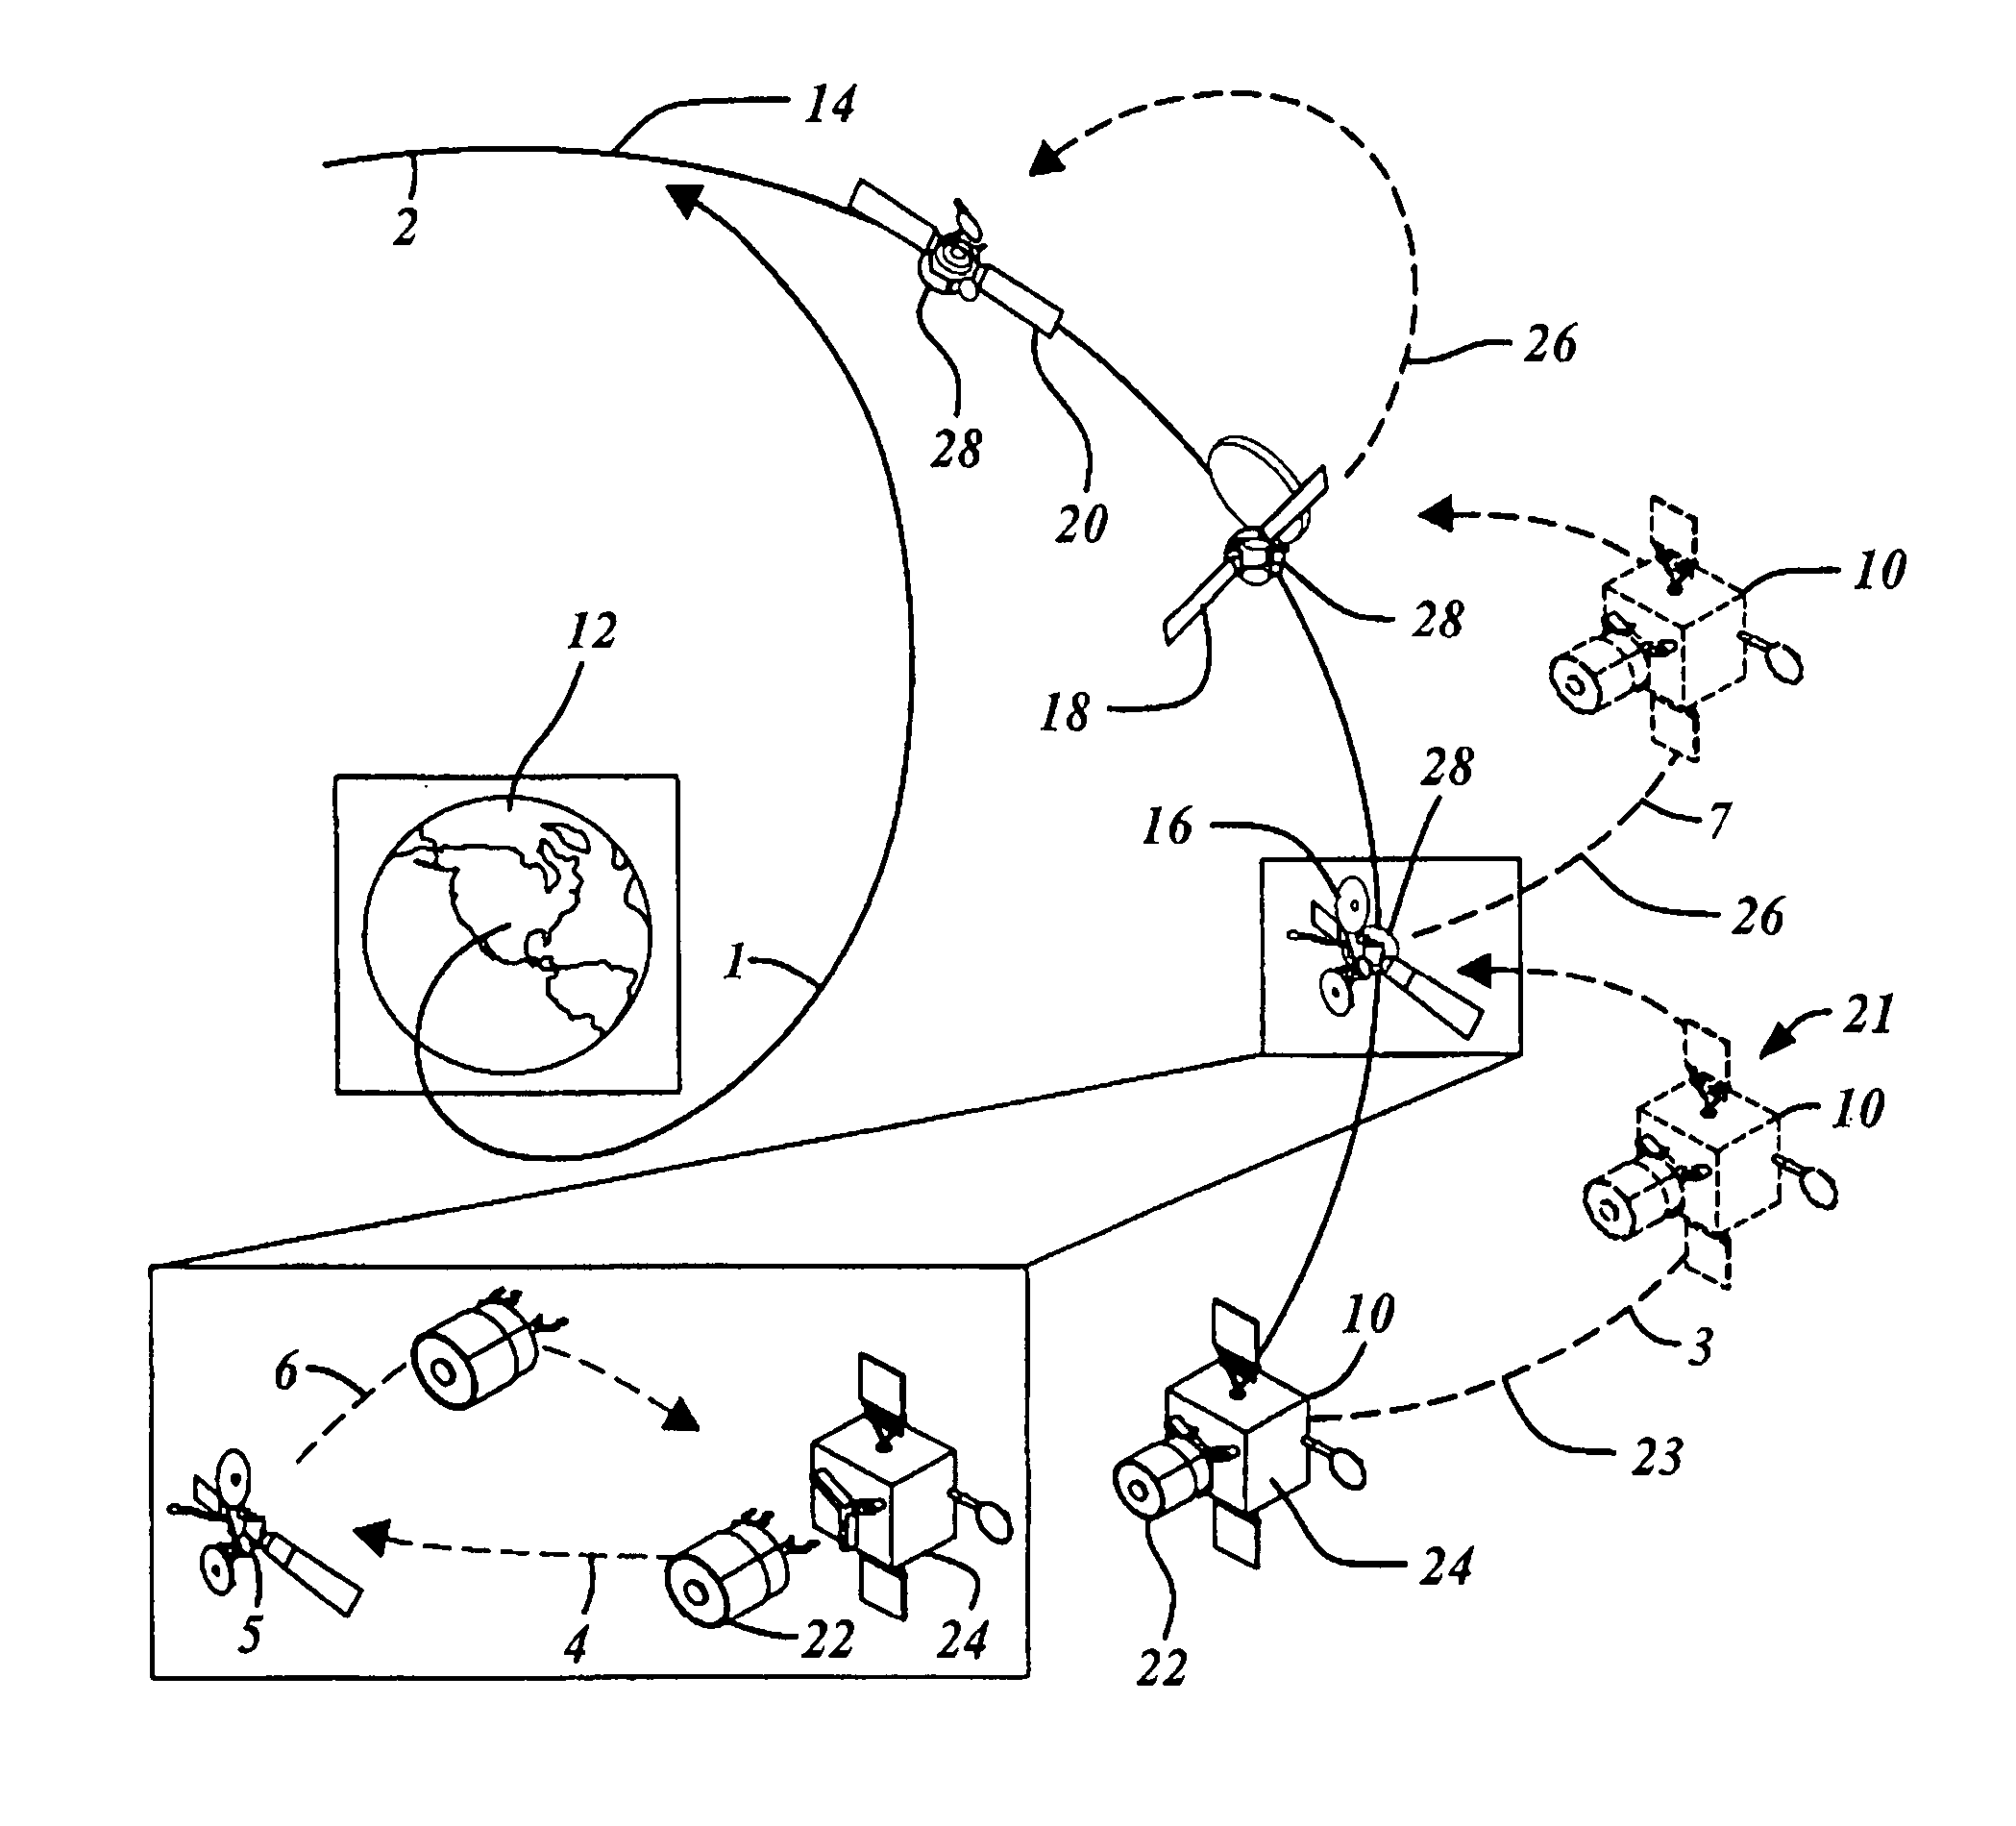 Two part spacecraft servicing vehicle system with universal docking adaptor